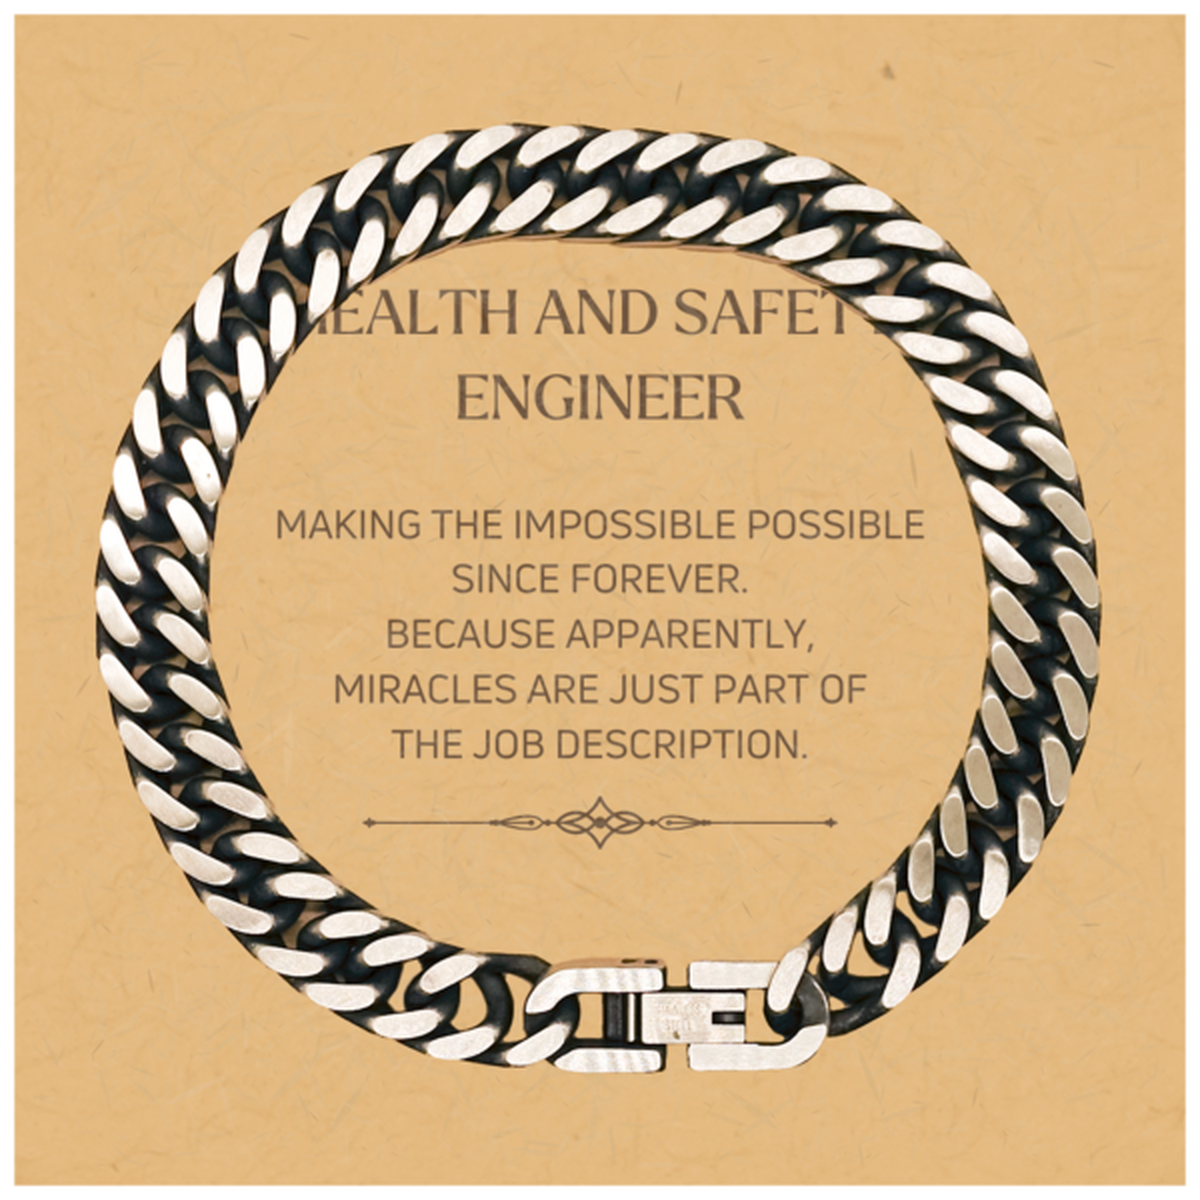 Funny Health and Safety Engineer Gifts, Miracles are just part of the job description, Inspirational Birthday Christmas Cuban Link Chain Bracelet For Health and Safety Engineer, Men, Women, Coworkers, Friends, Boss